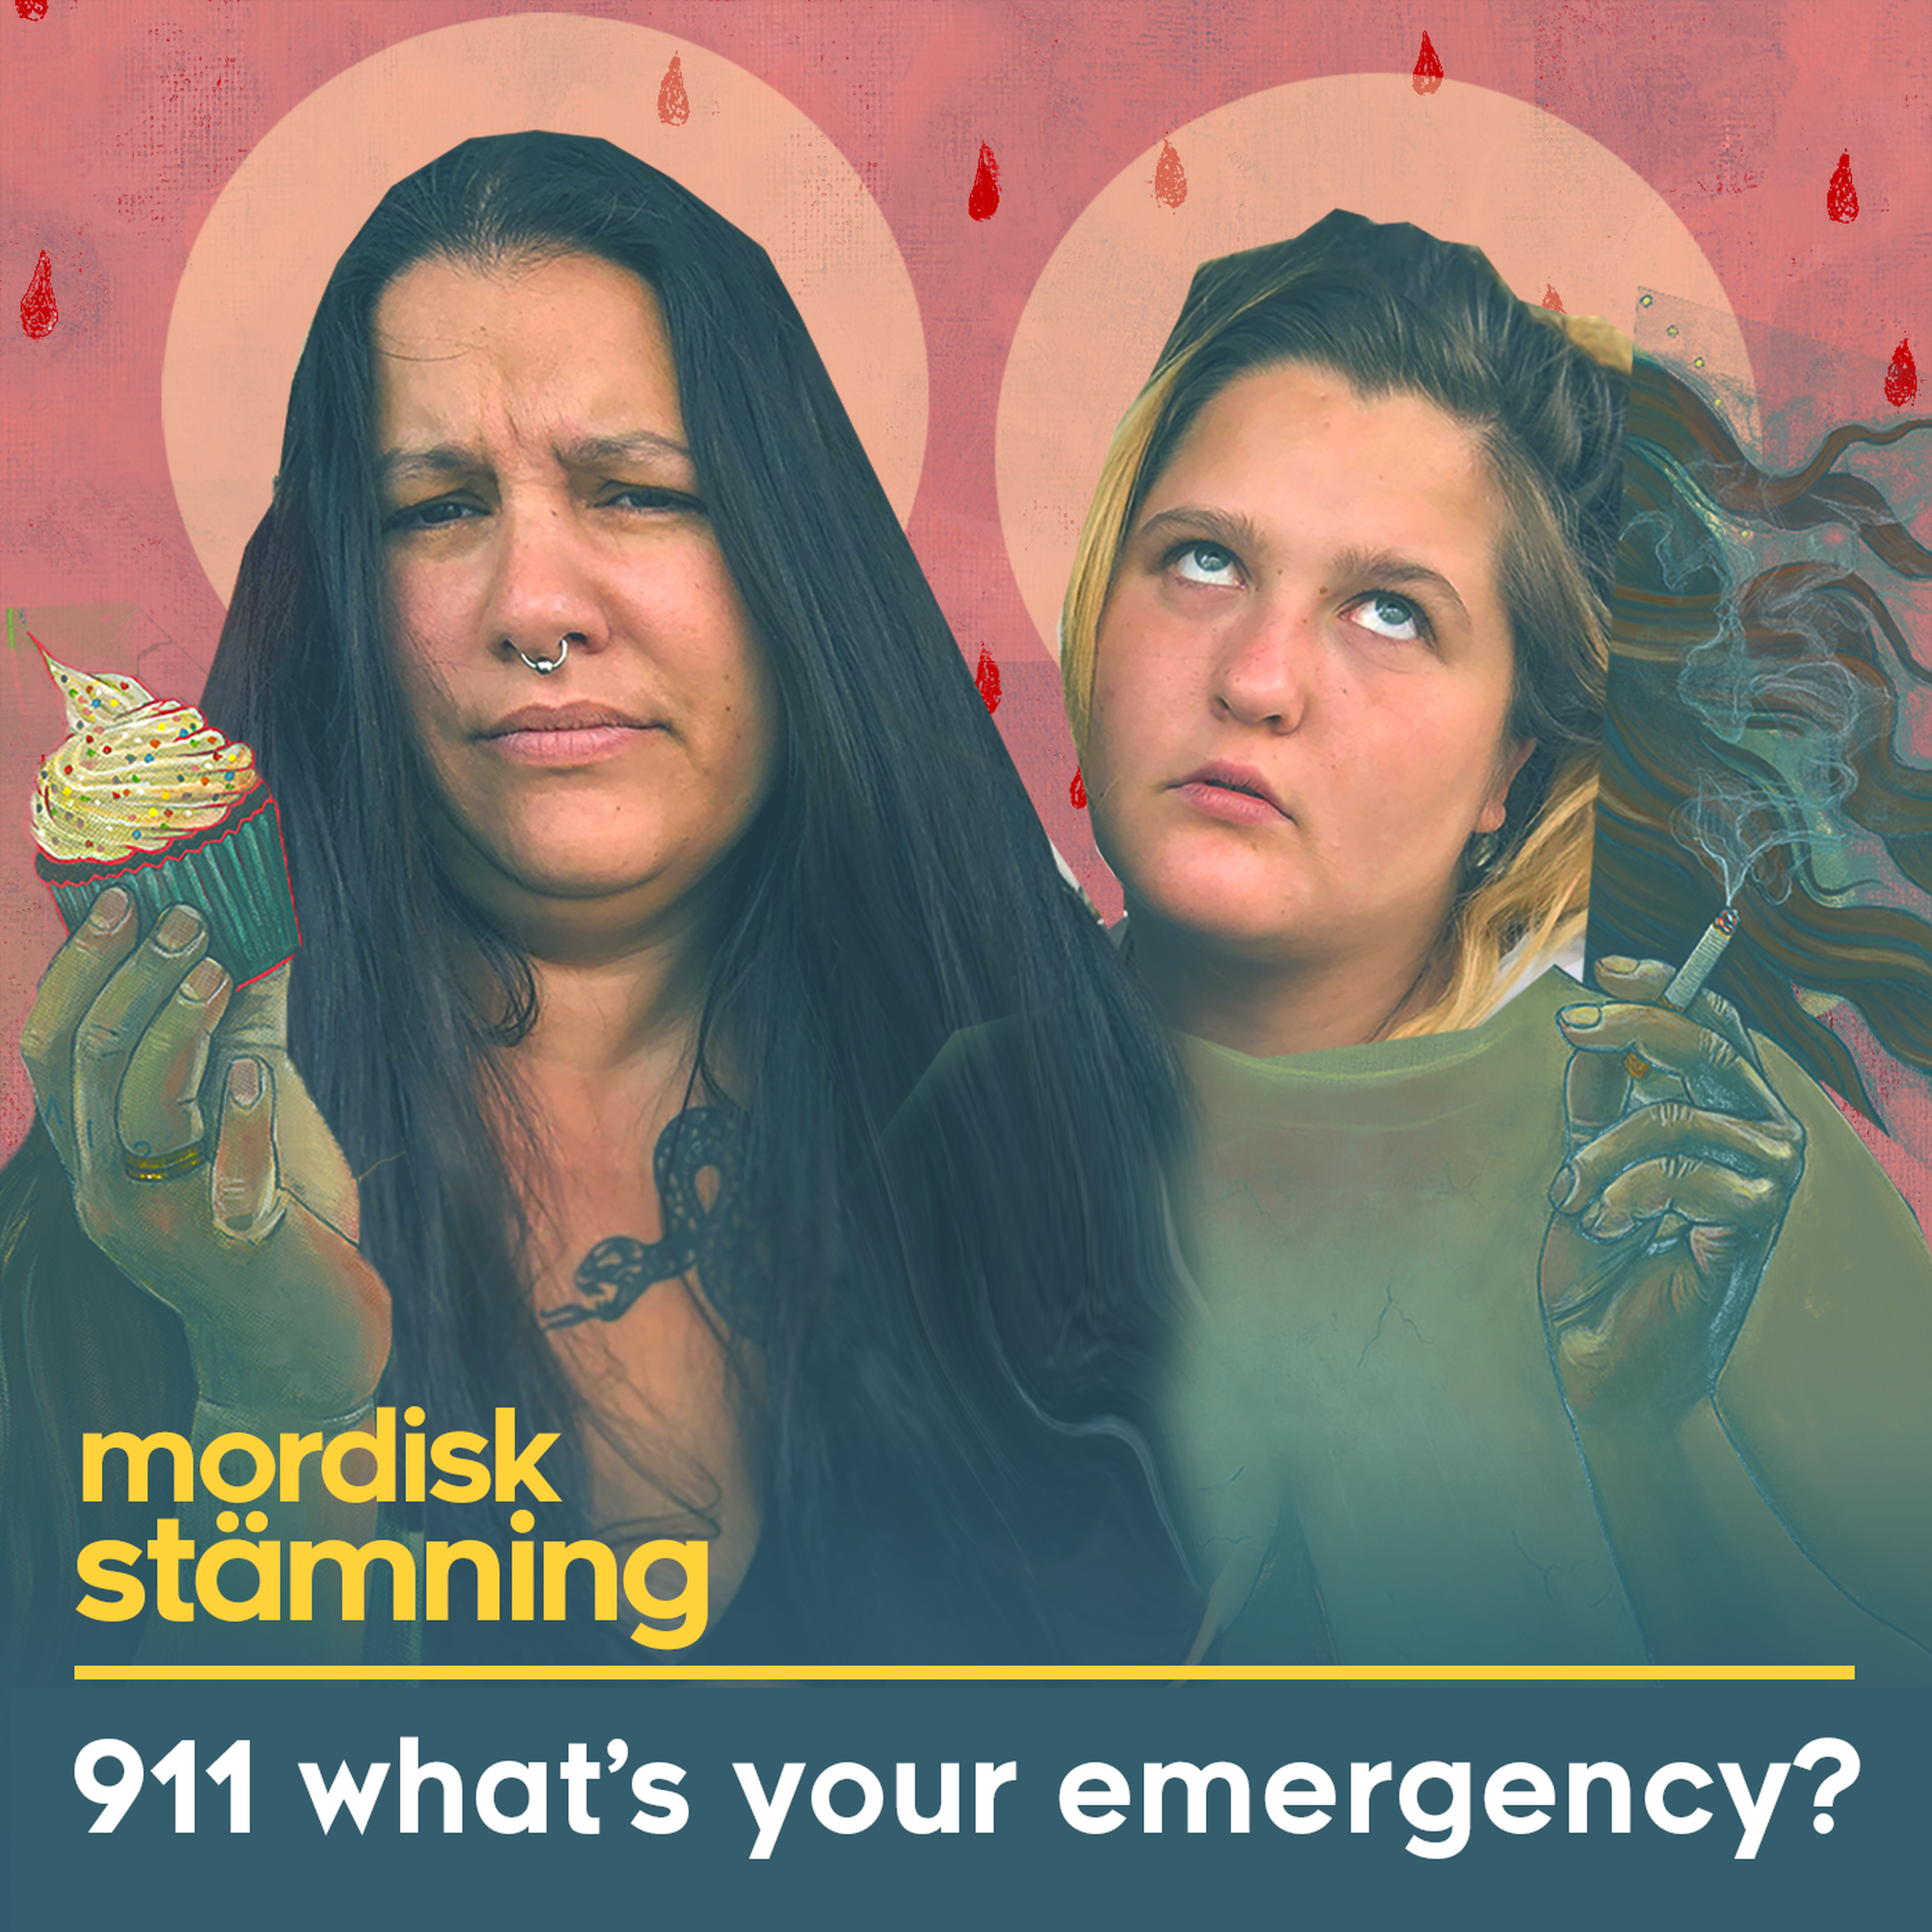 MORDISK STÄMNING // 911 what’s your emergency?